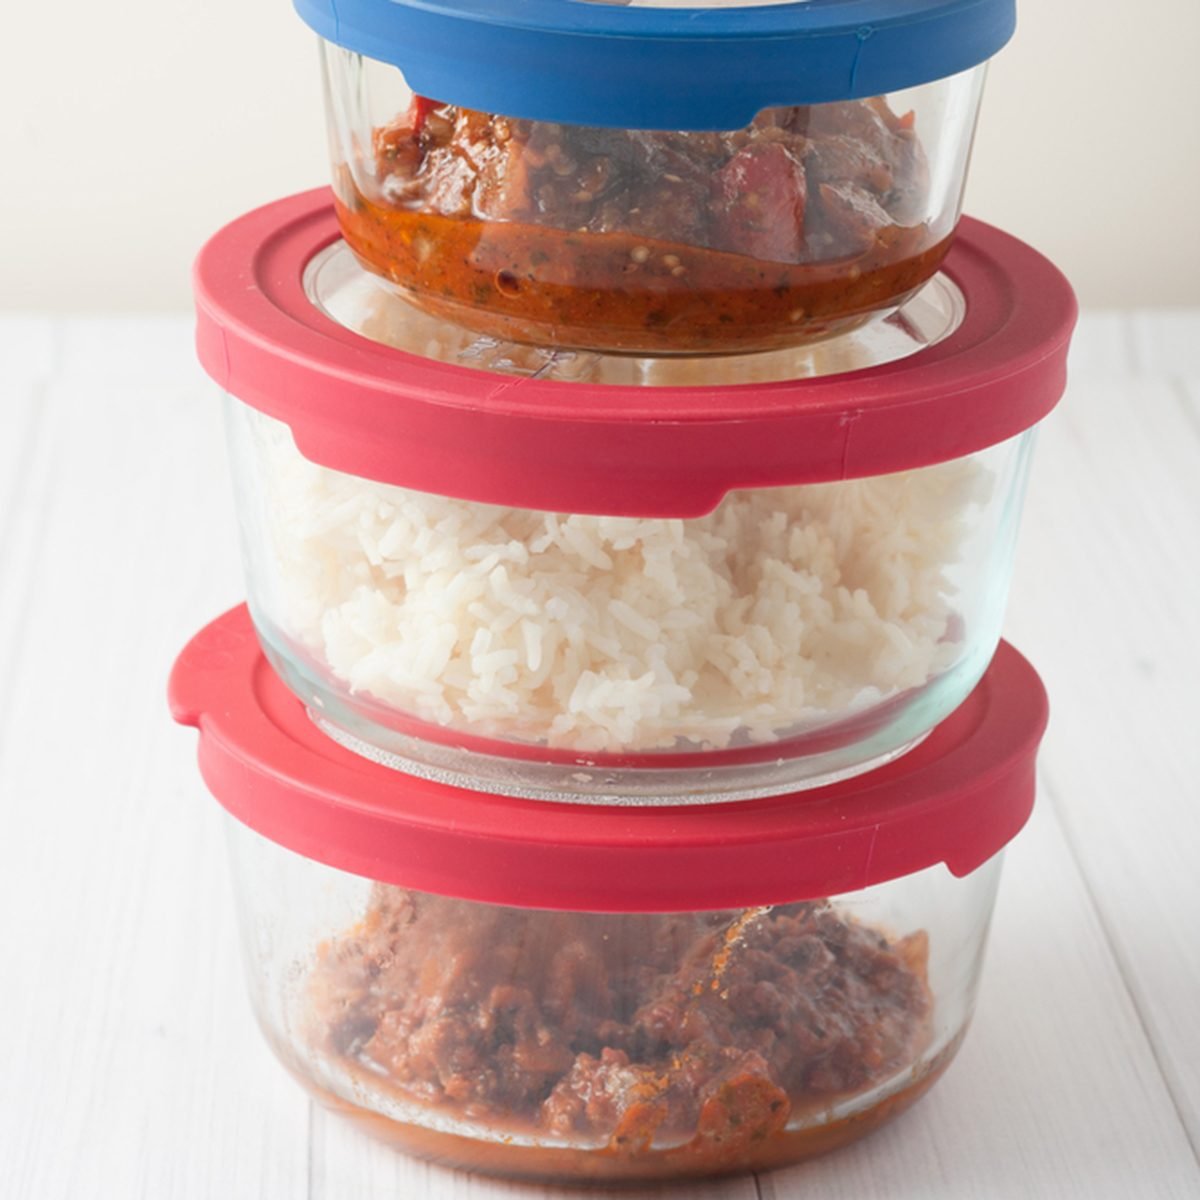 When to Throw Away Your Old Food Containers, According to the